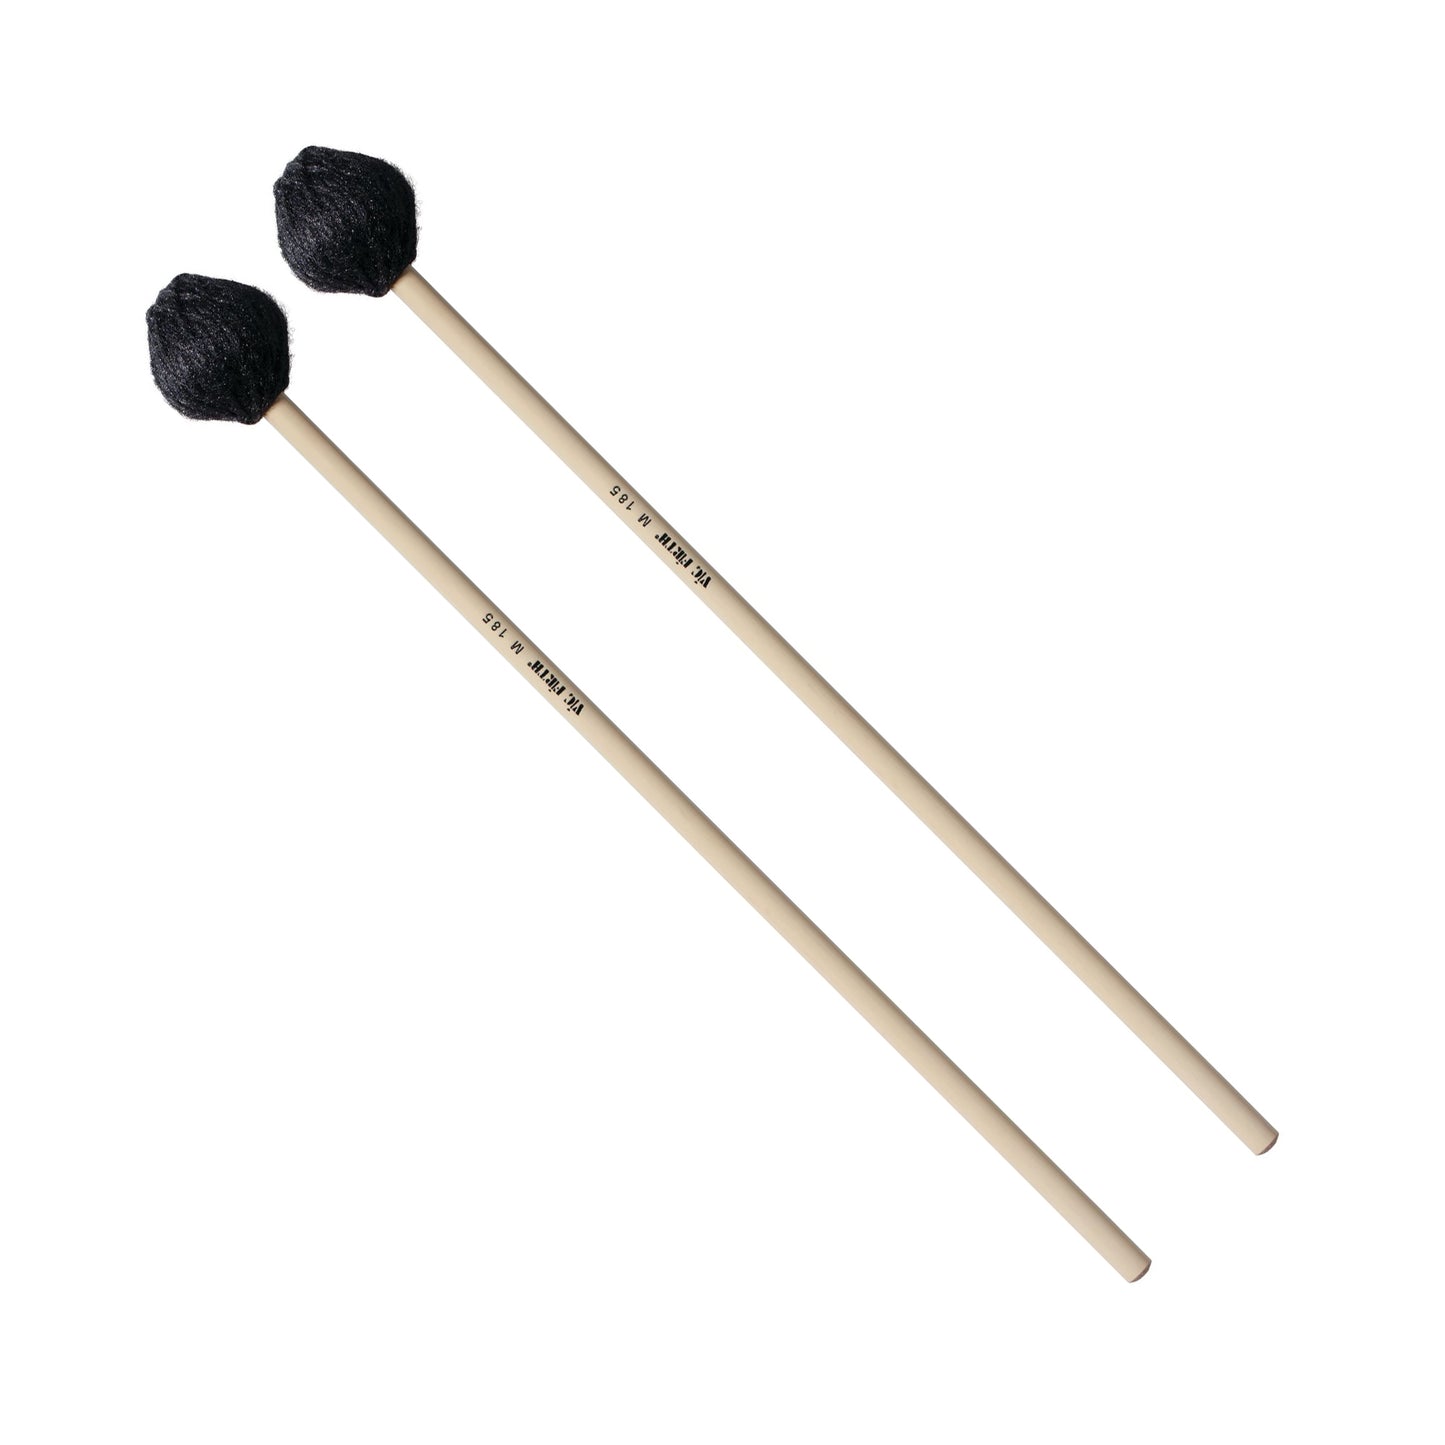 M185 - Corpsmaster Multi-Application Series - Soft, Weighted Rubber Core Mallets